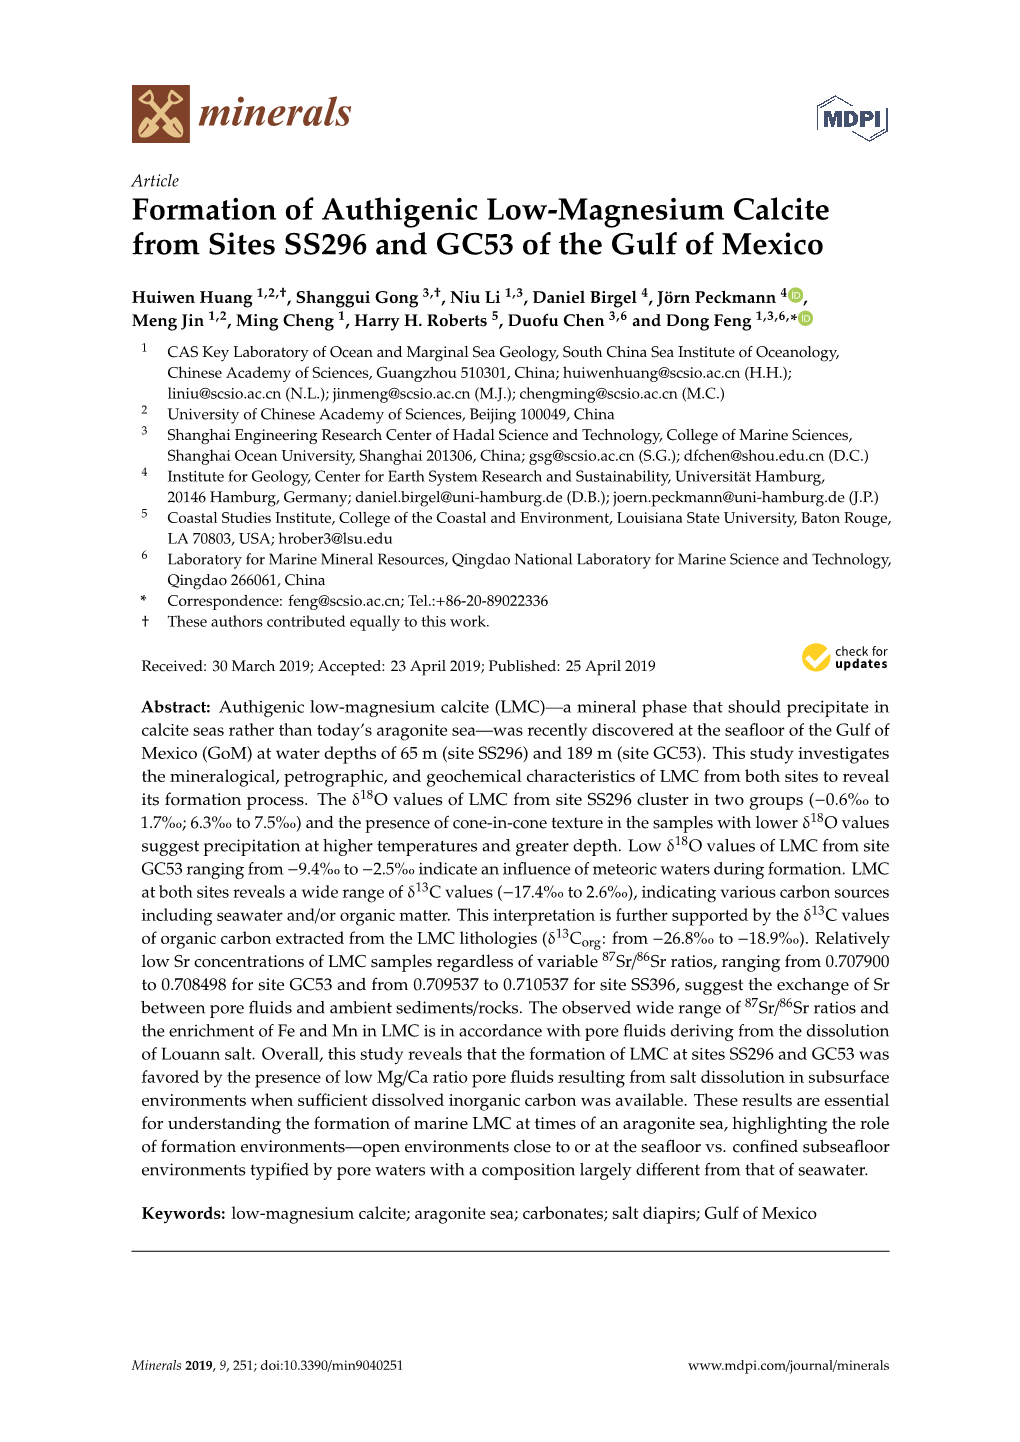 Formation of Authigenic Low-Magnesium Calcite from Sites SS296 and GC53 of the Gulf of Mexico